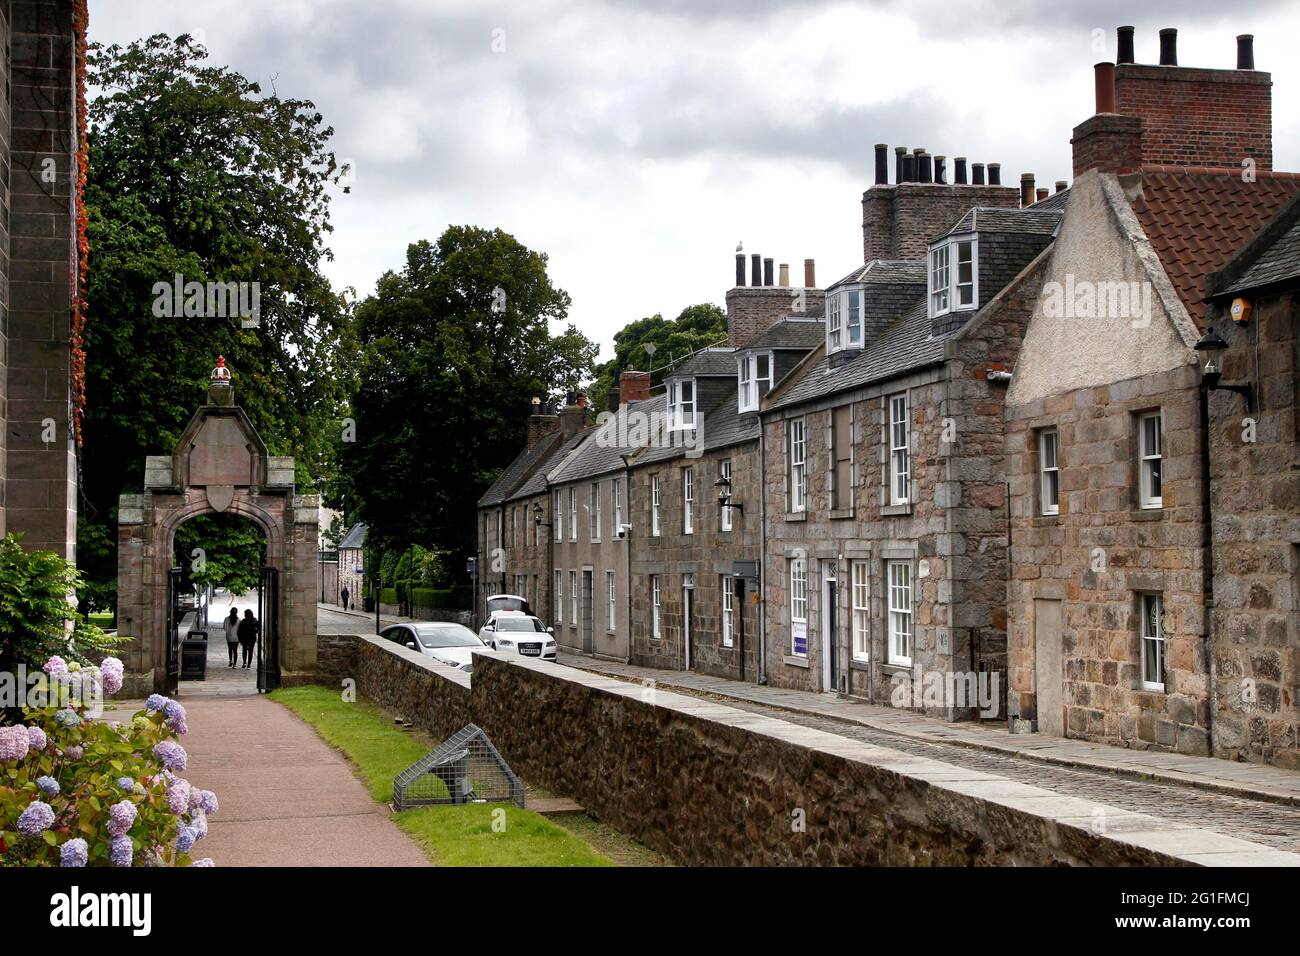 King's College, High Street, Houses, Old Town, Old Aberdeen, Aberdeen, East Coast, Highlands, Highlands, Scozia, Regno Unito Foto Stock